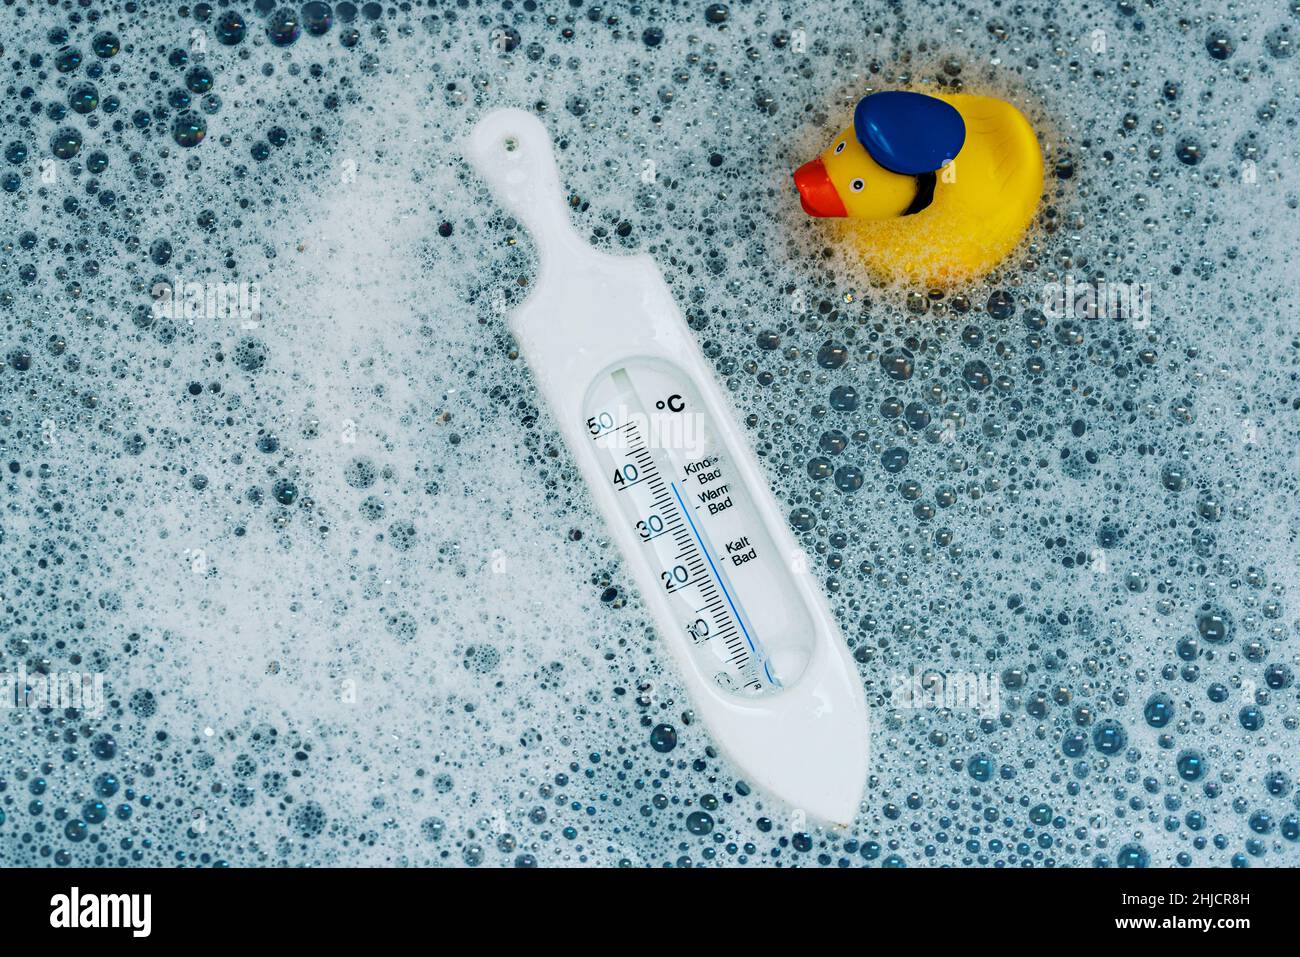 above view of thermometer in baby bath for temberature check Stock Photo